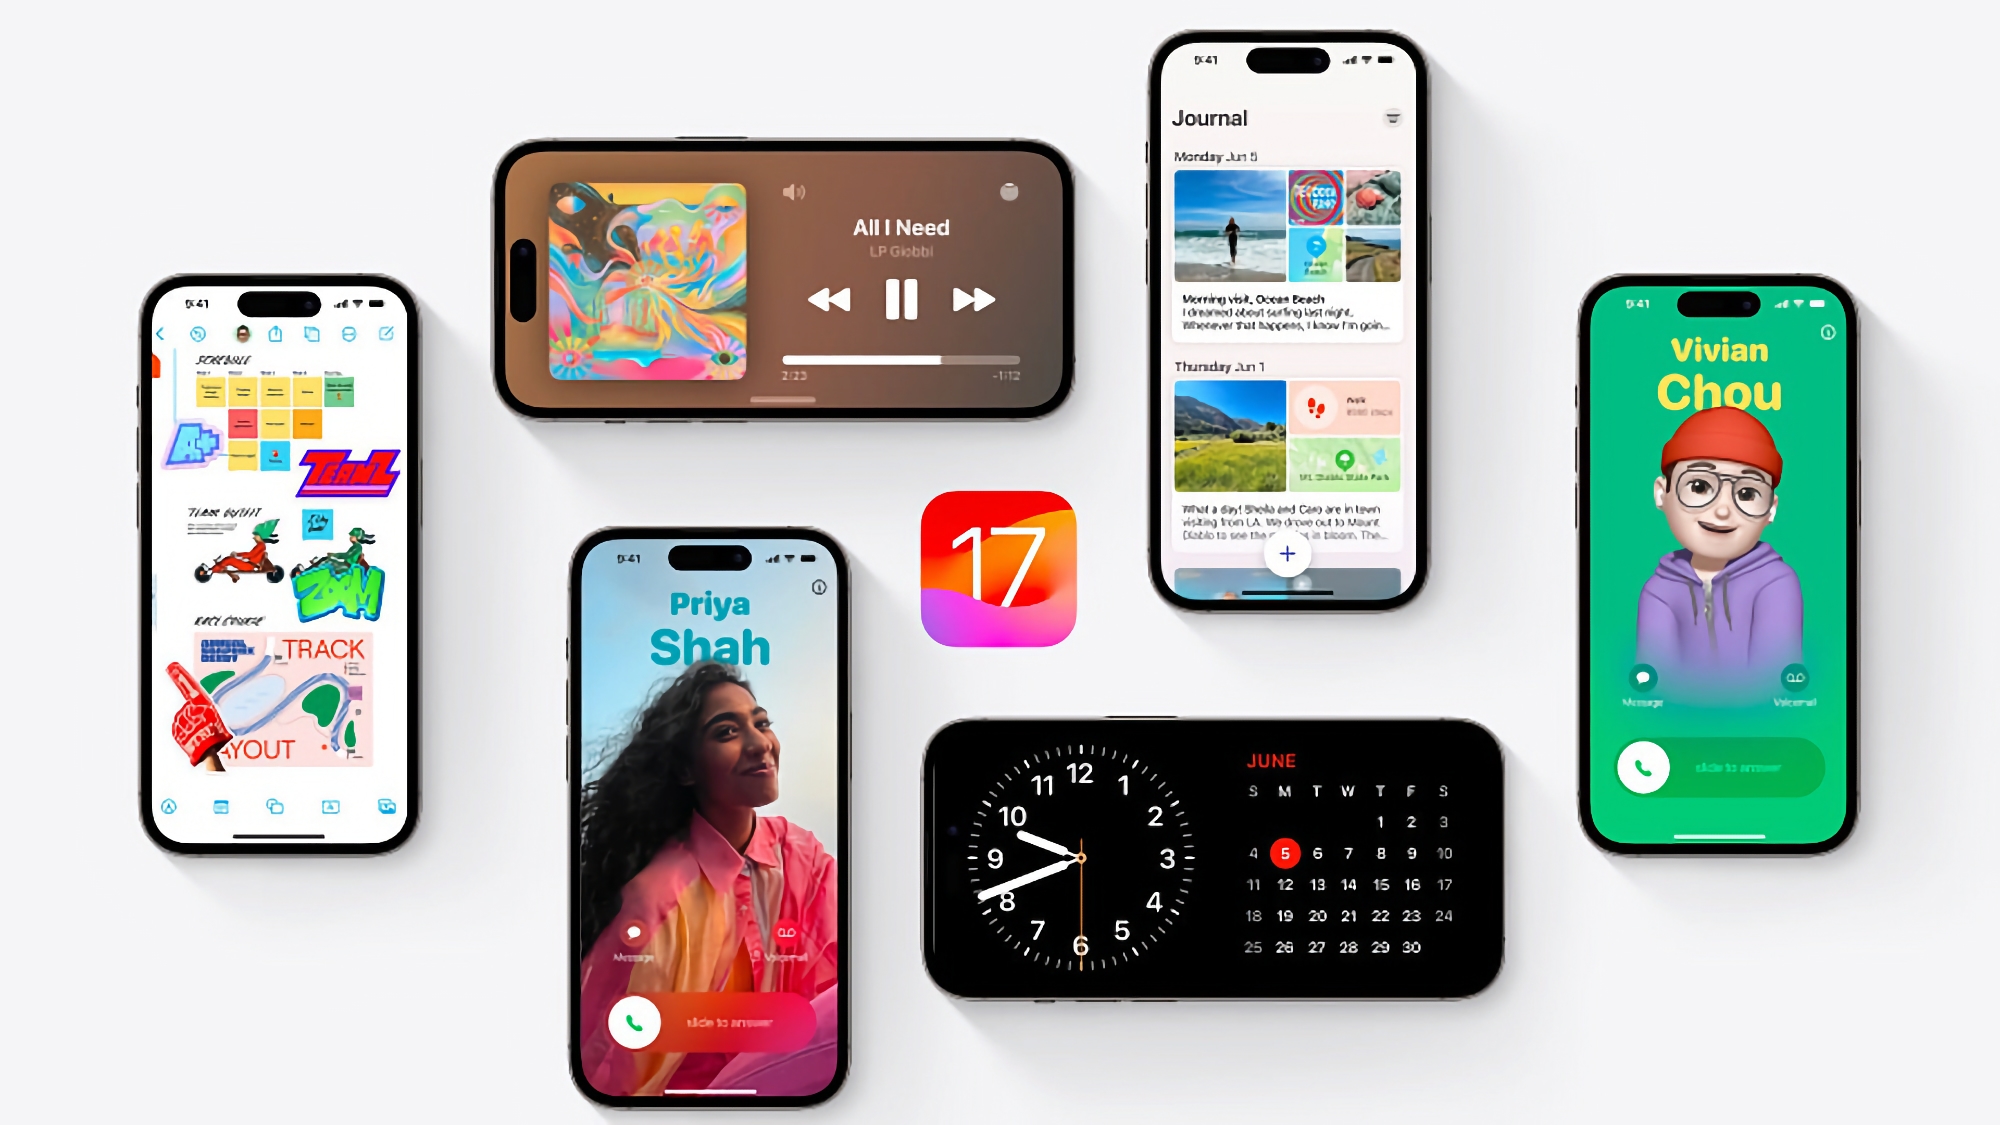 Apple has released a stable version of iOS 17 for iPhone XS, iPhone XR, iPhone SE and newer models